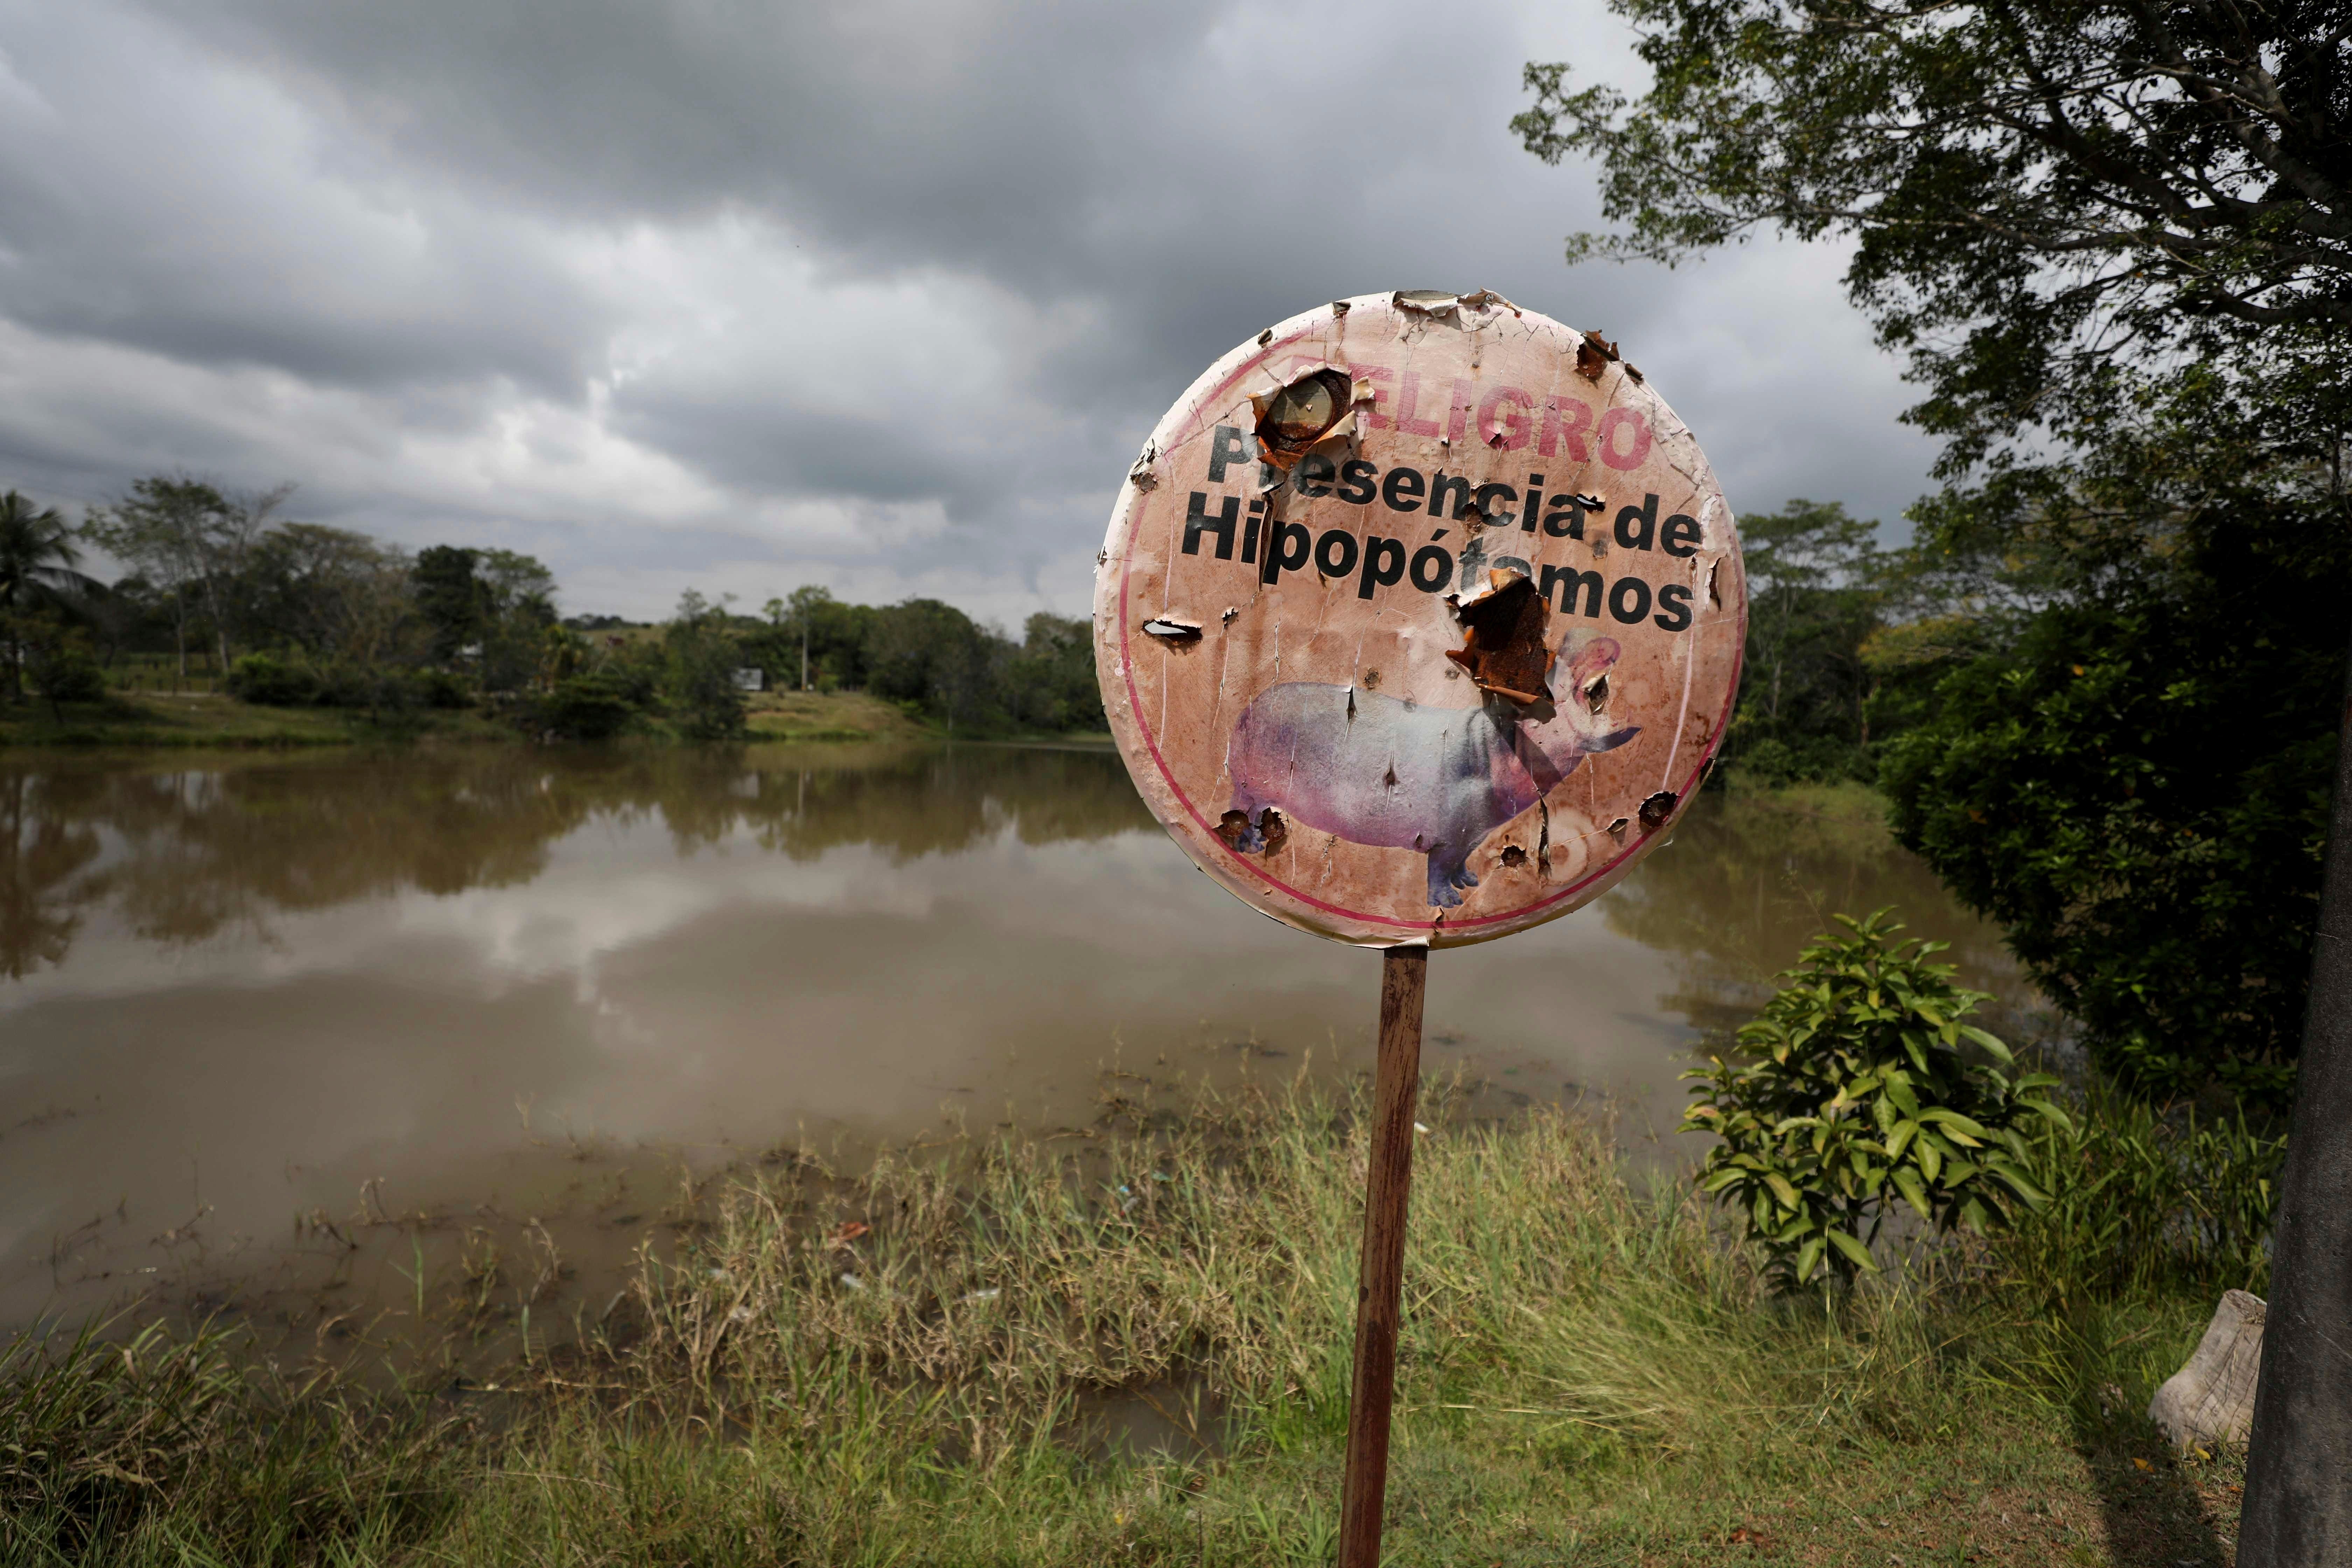 A hippo warning stands on the shore of a lagoon near Doral, Colombia